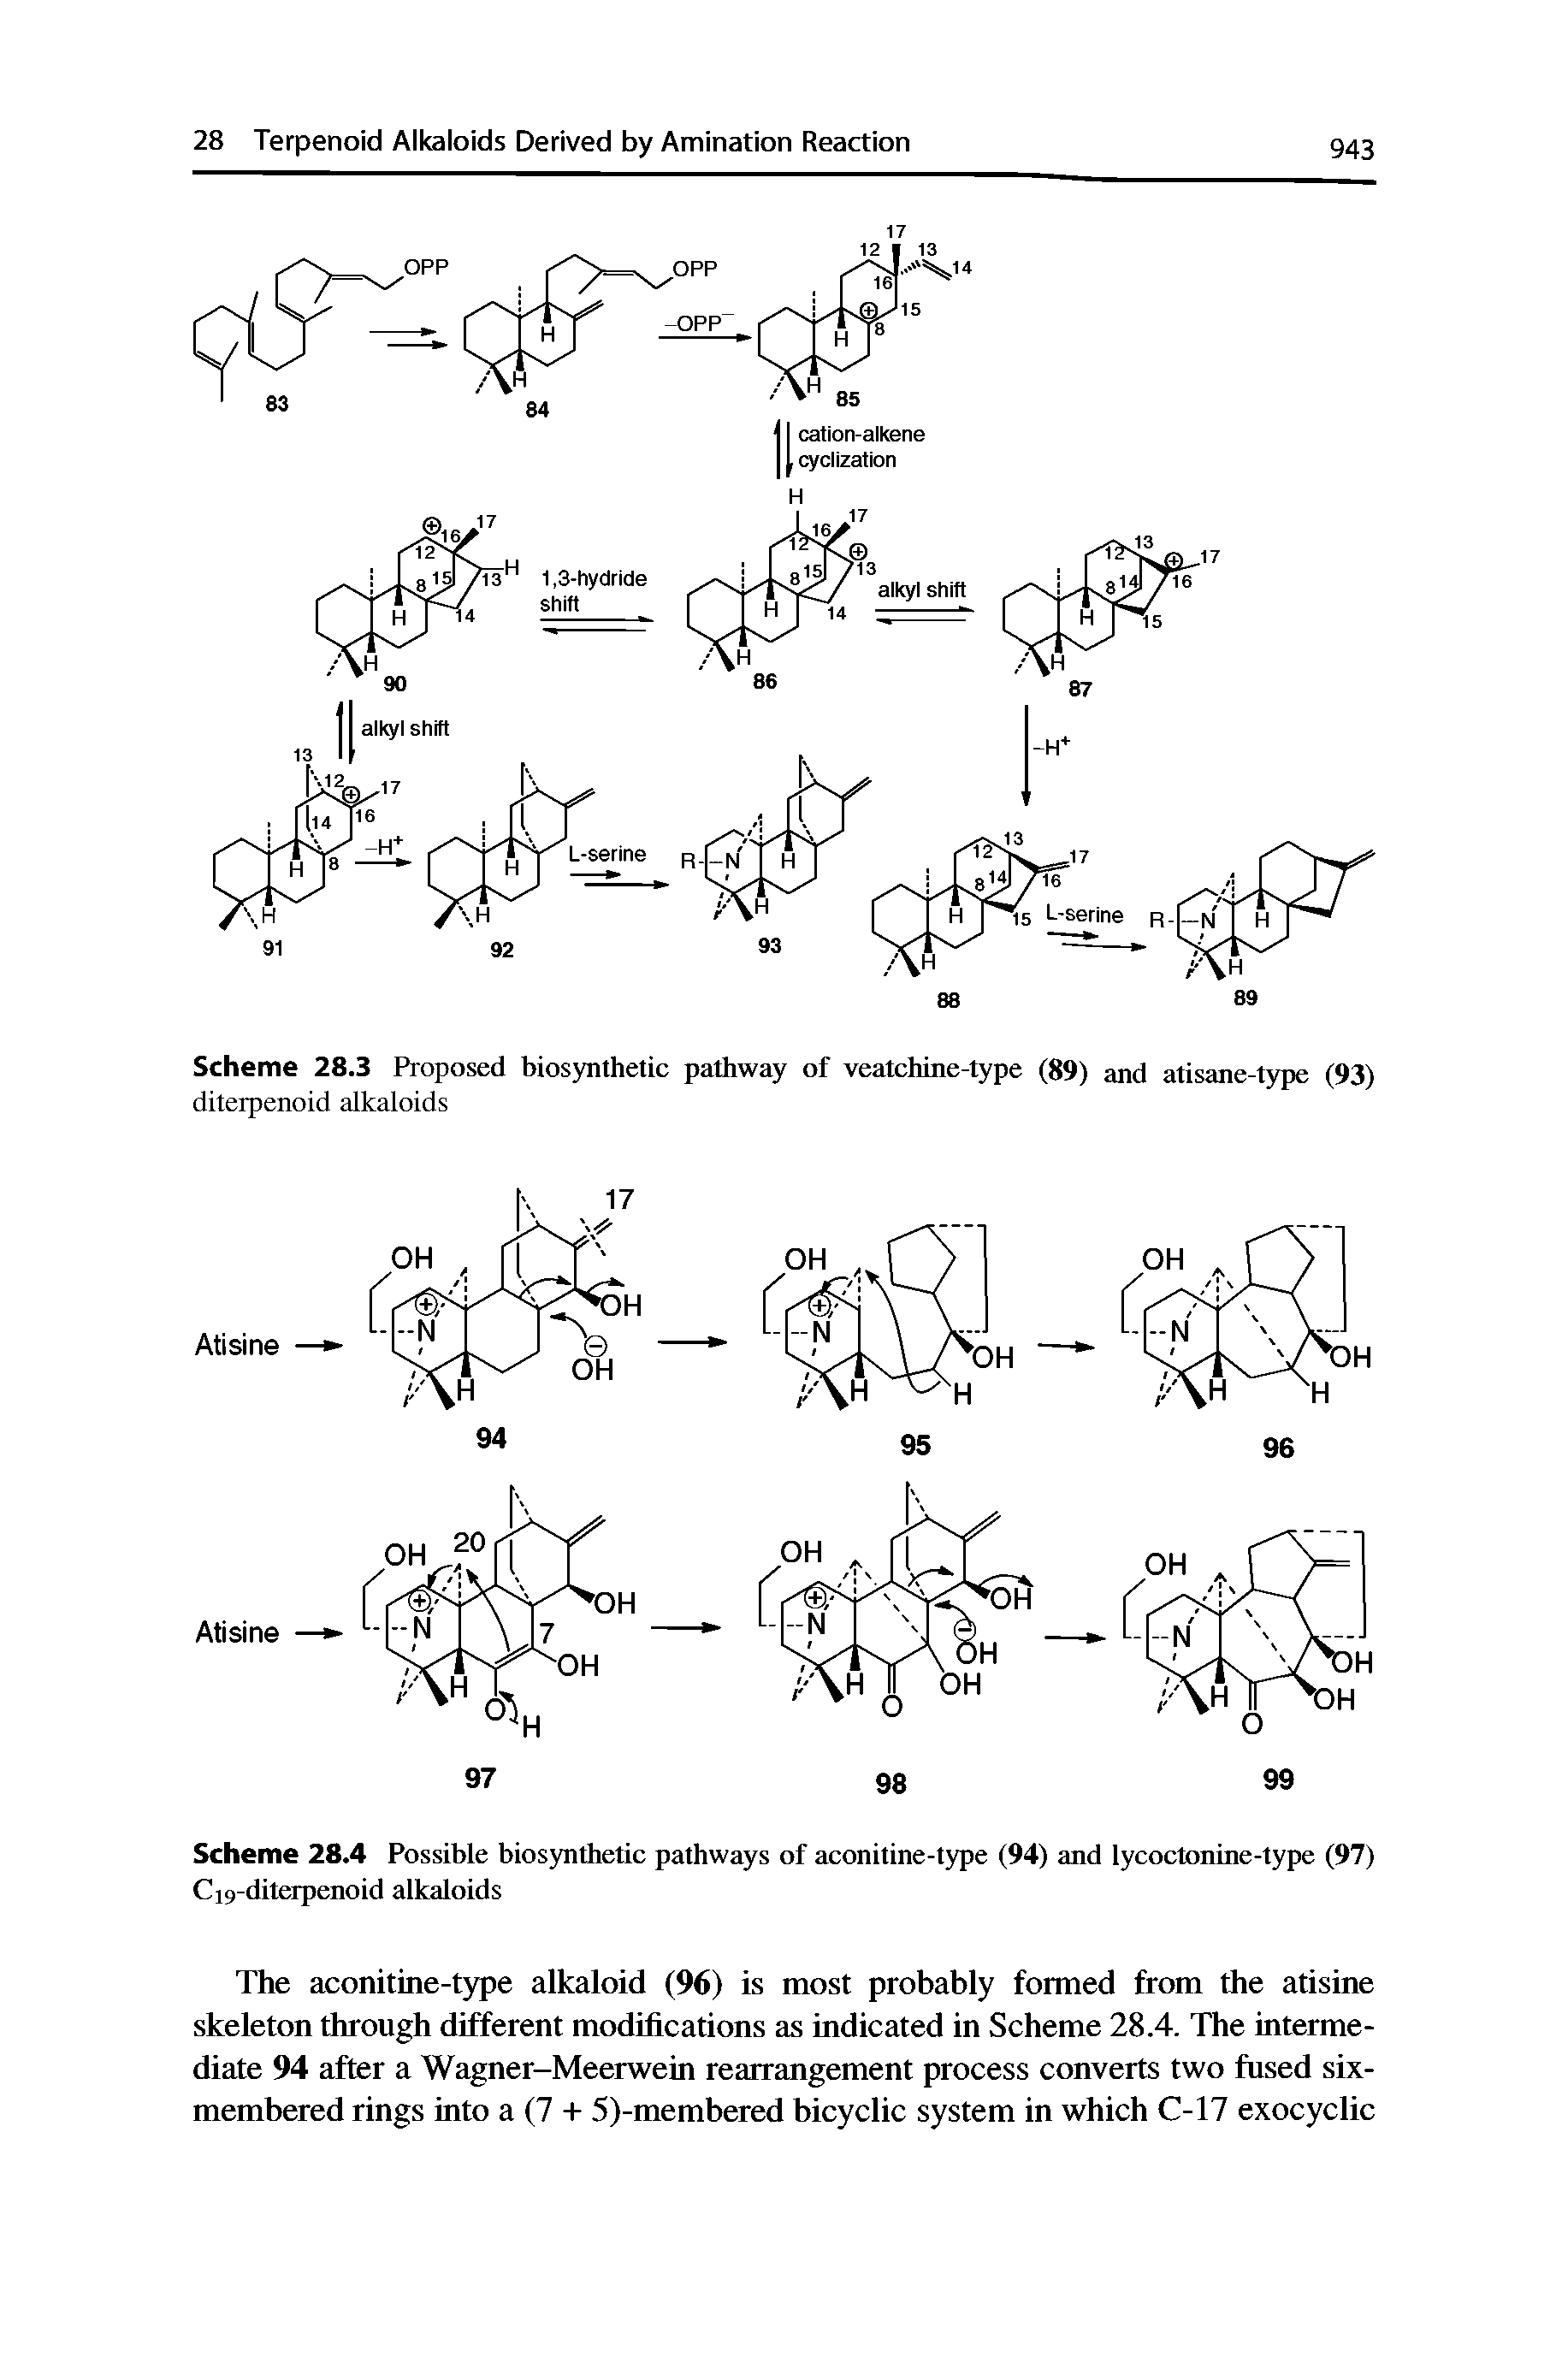 Scheme 28.4 Possible biosynthetic pathways of aconitine-type (94) and lycoctonine-type (97) Ci9-diterpenoid alkaloids...